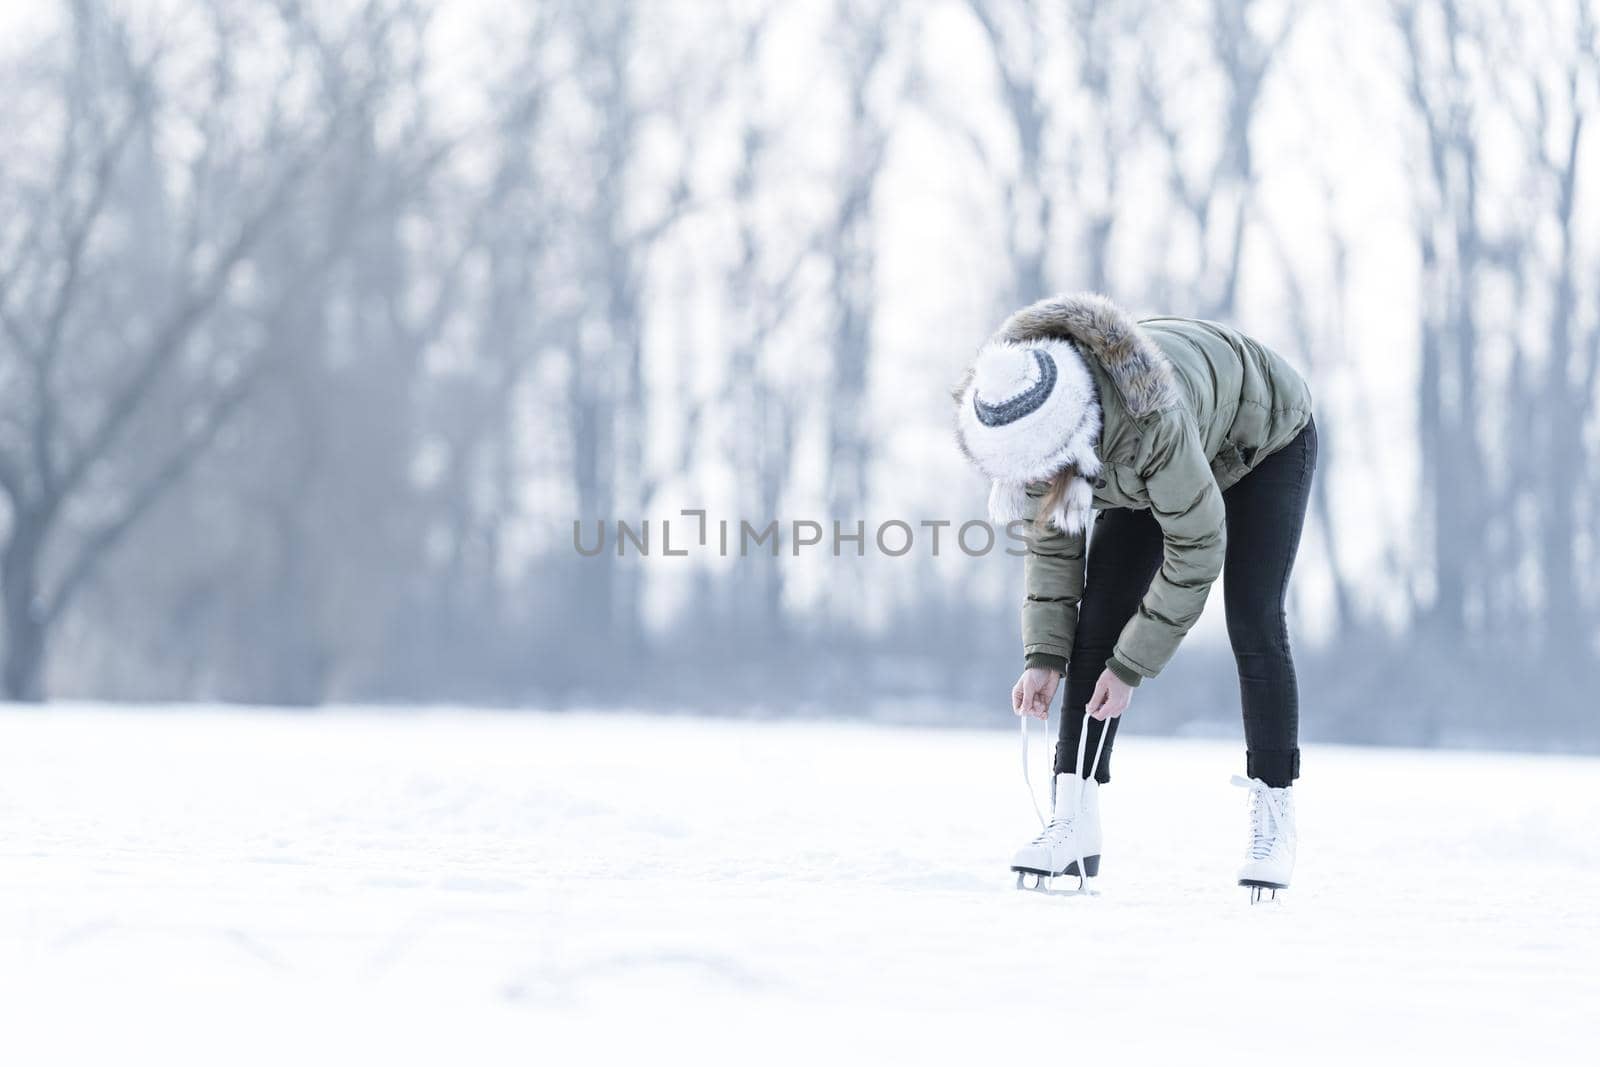 tying the laces of winter skates on a frozen lake